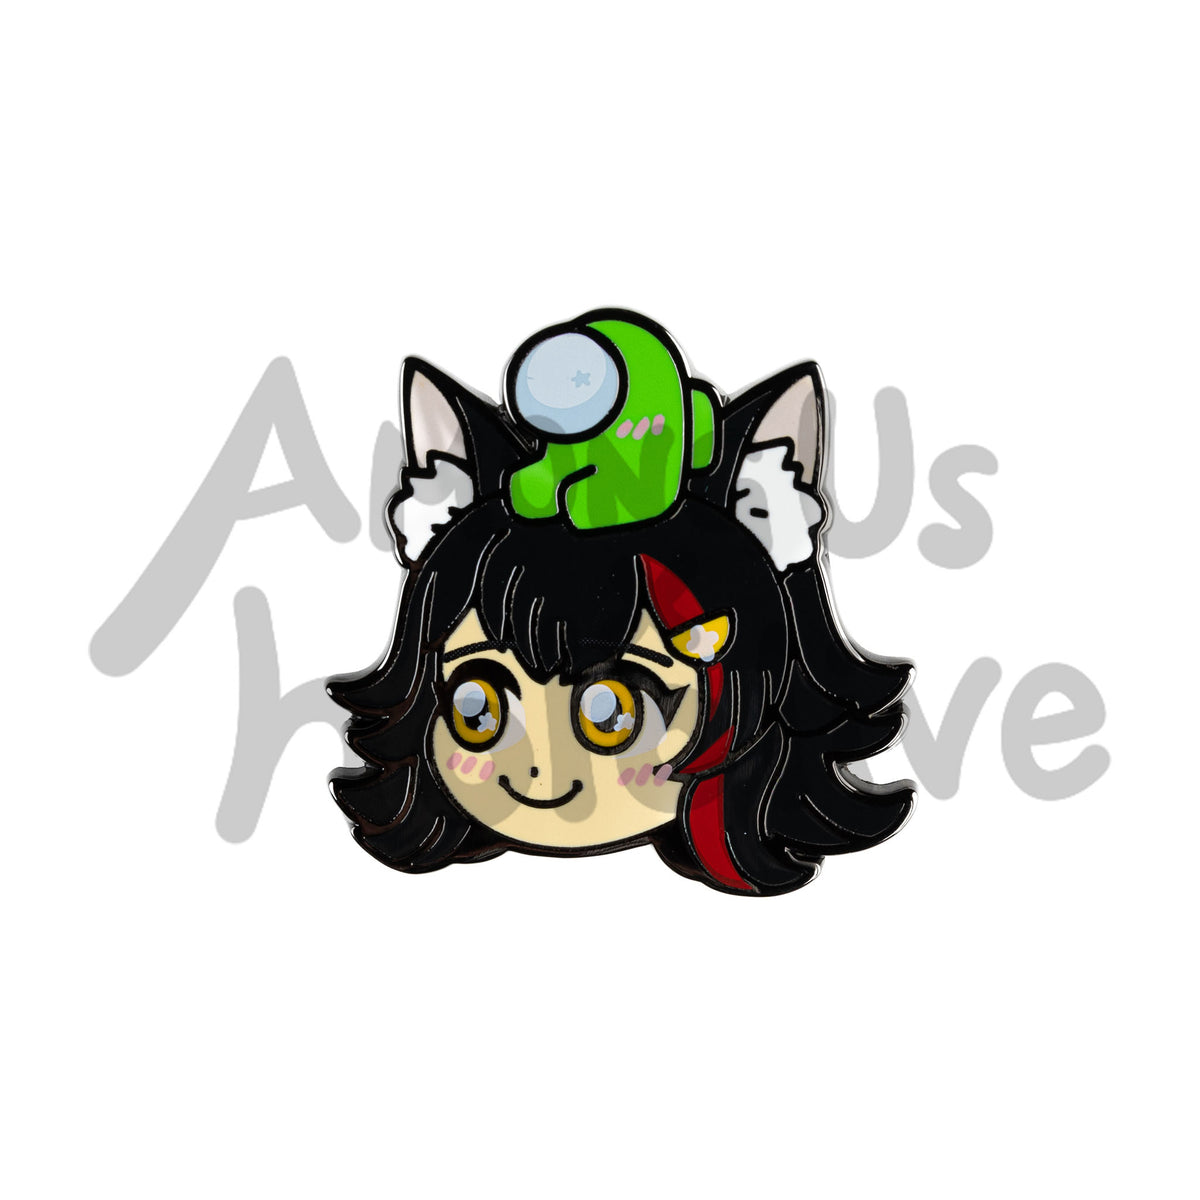 Enamel Pin of Ookami Mio&#39;s Face from Hololive. Mio has fair skin, marigold sparkly eyes, and black bobbed hair with matching black cat ears with white tufts. She has a red streak in her hair. There&#39;s a Lime Crewmate sitting atop her head. Both characters have pink blush marks on their faces.